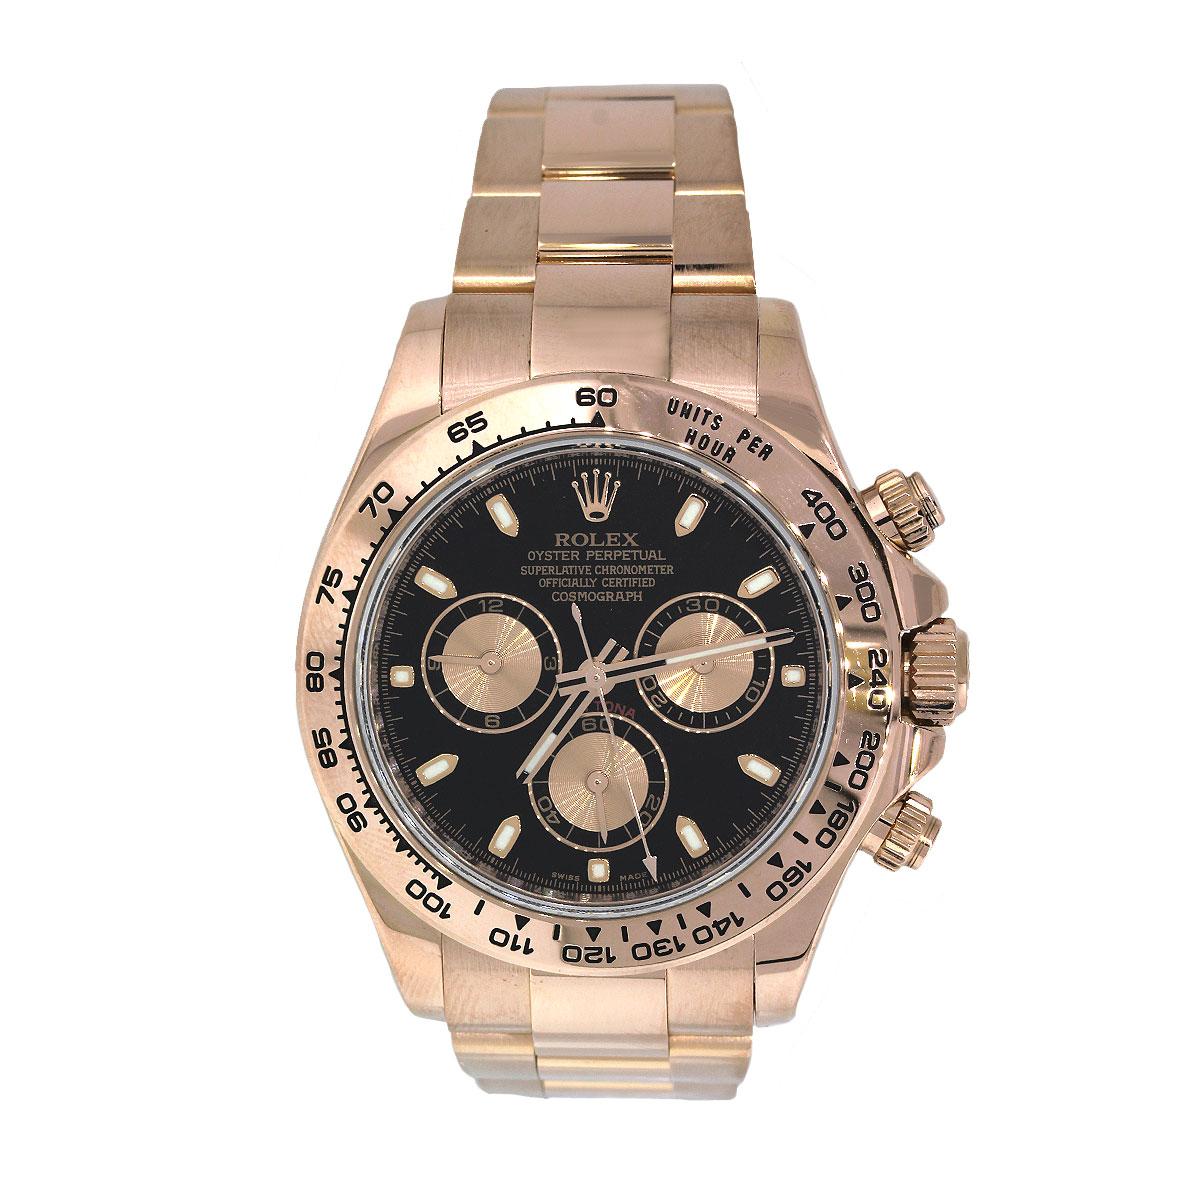 Brand: Rolex
MPN: 116505
Model: Daytona
Case Material: 18k Rose Gold
Case Diameter: 40mm
Crystal: Scratch resistant sapphire
Bezel: Original Rolex fixed rose gold bezel with an engraved Tachymetric scale
Dial: Black dial with luminous hands and hour